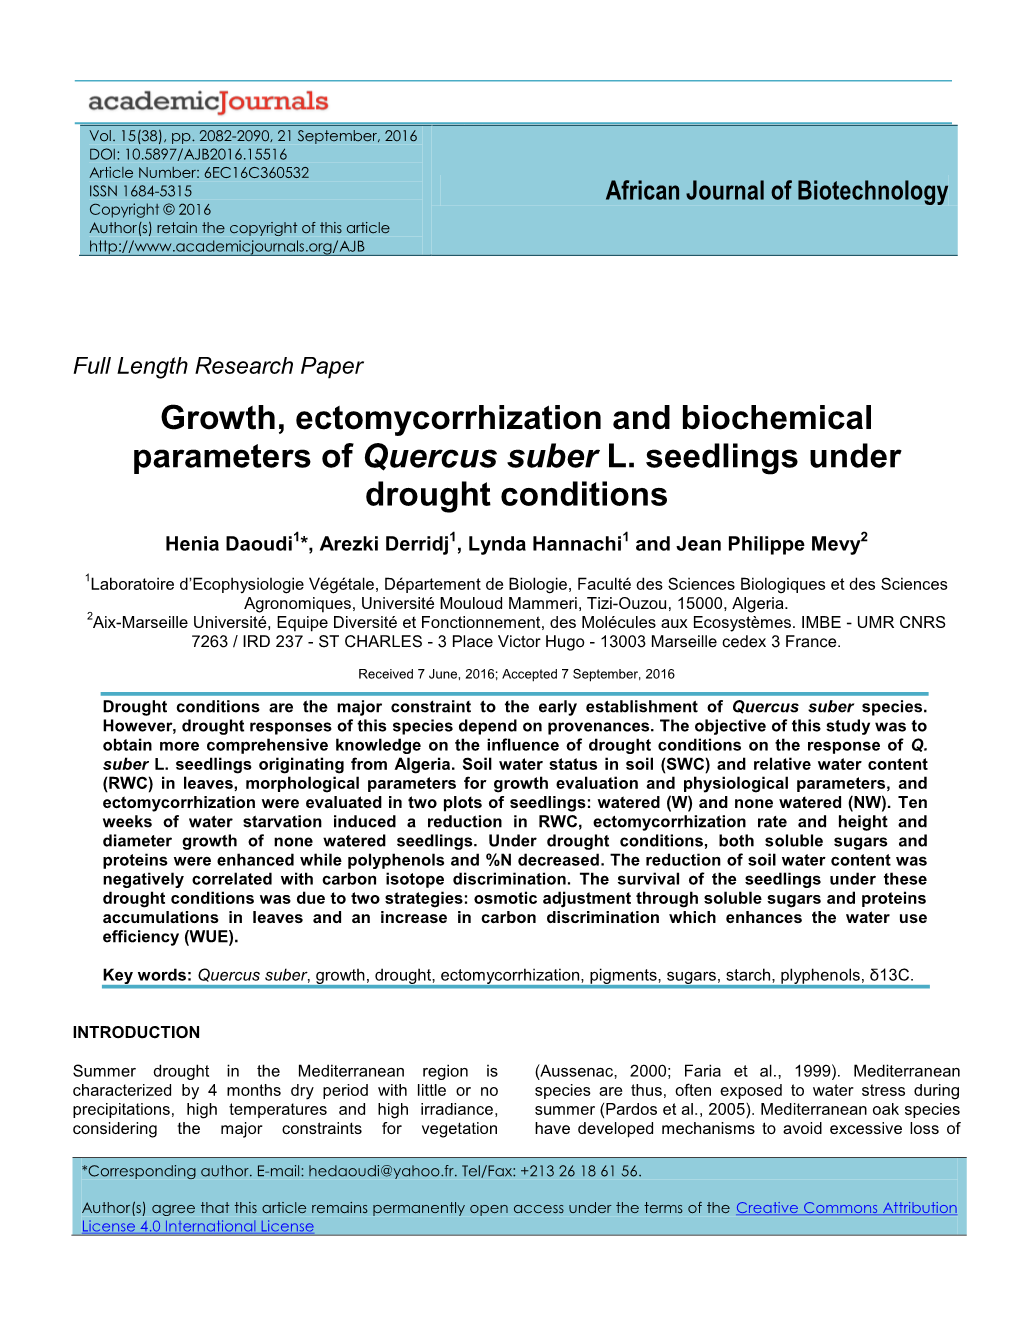 Growth, Ectomycorrhization and Biochemical Parameters of Quercus Suber L